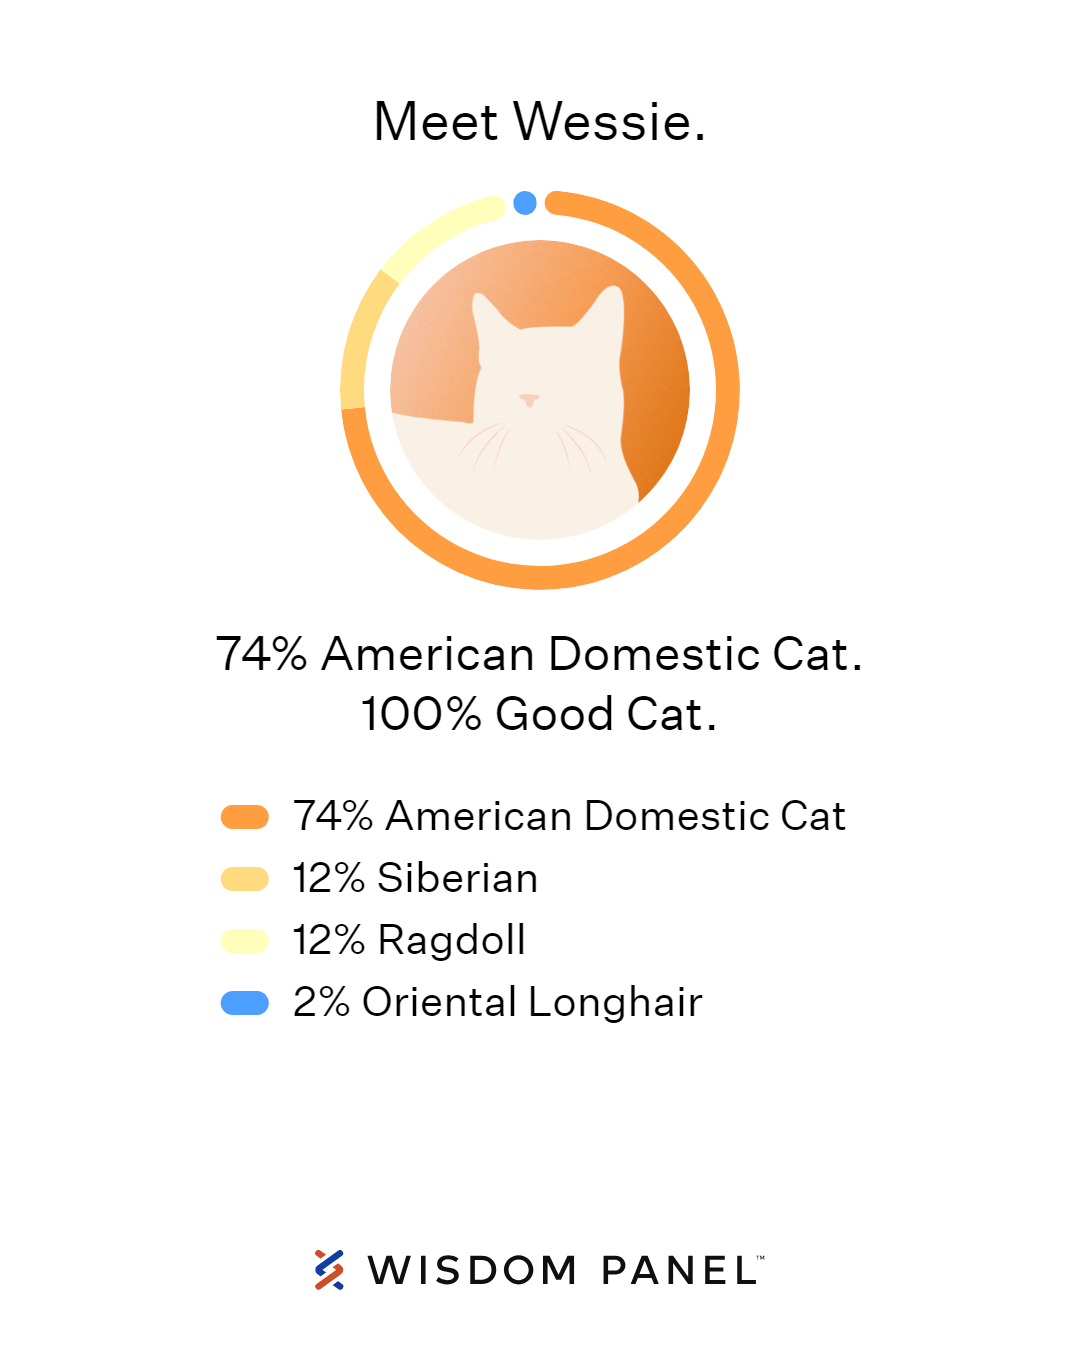 Wessie's Wisdom Panel Breed Results